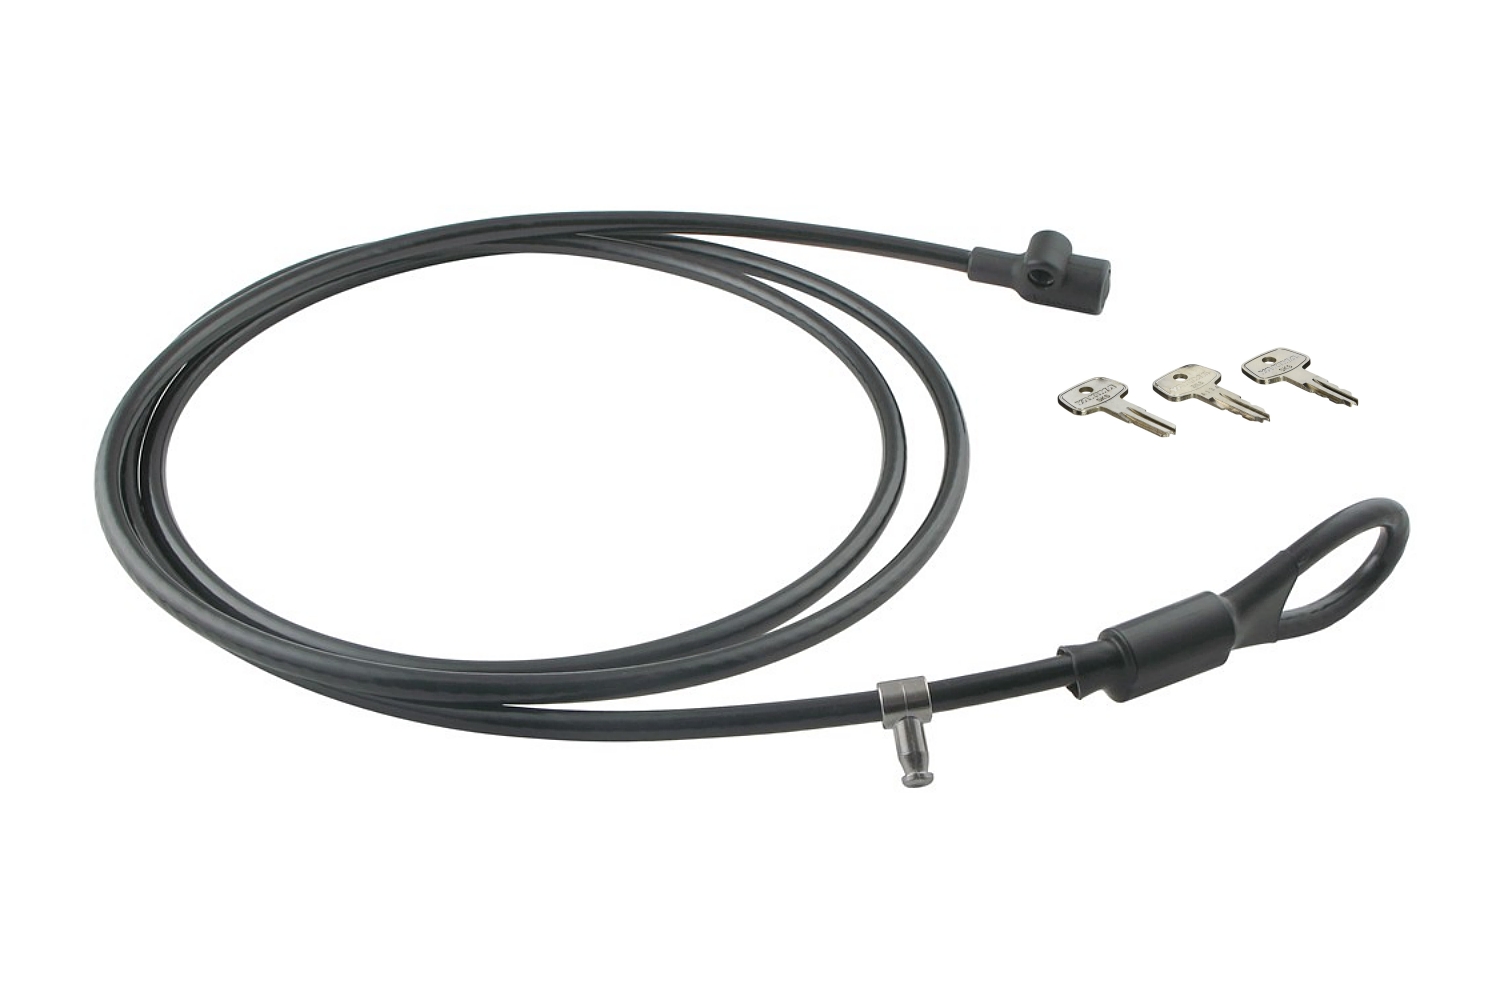 Yakima 9ft Security Cable + Lock Cores